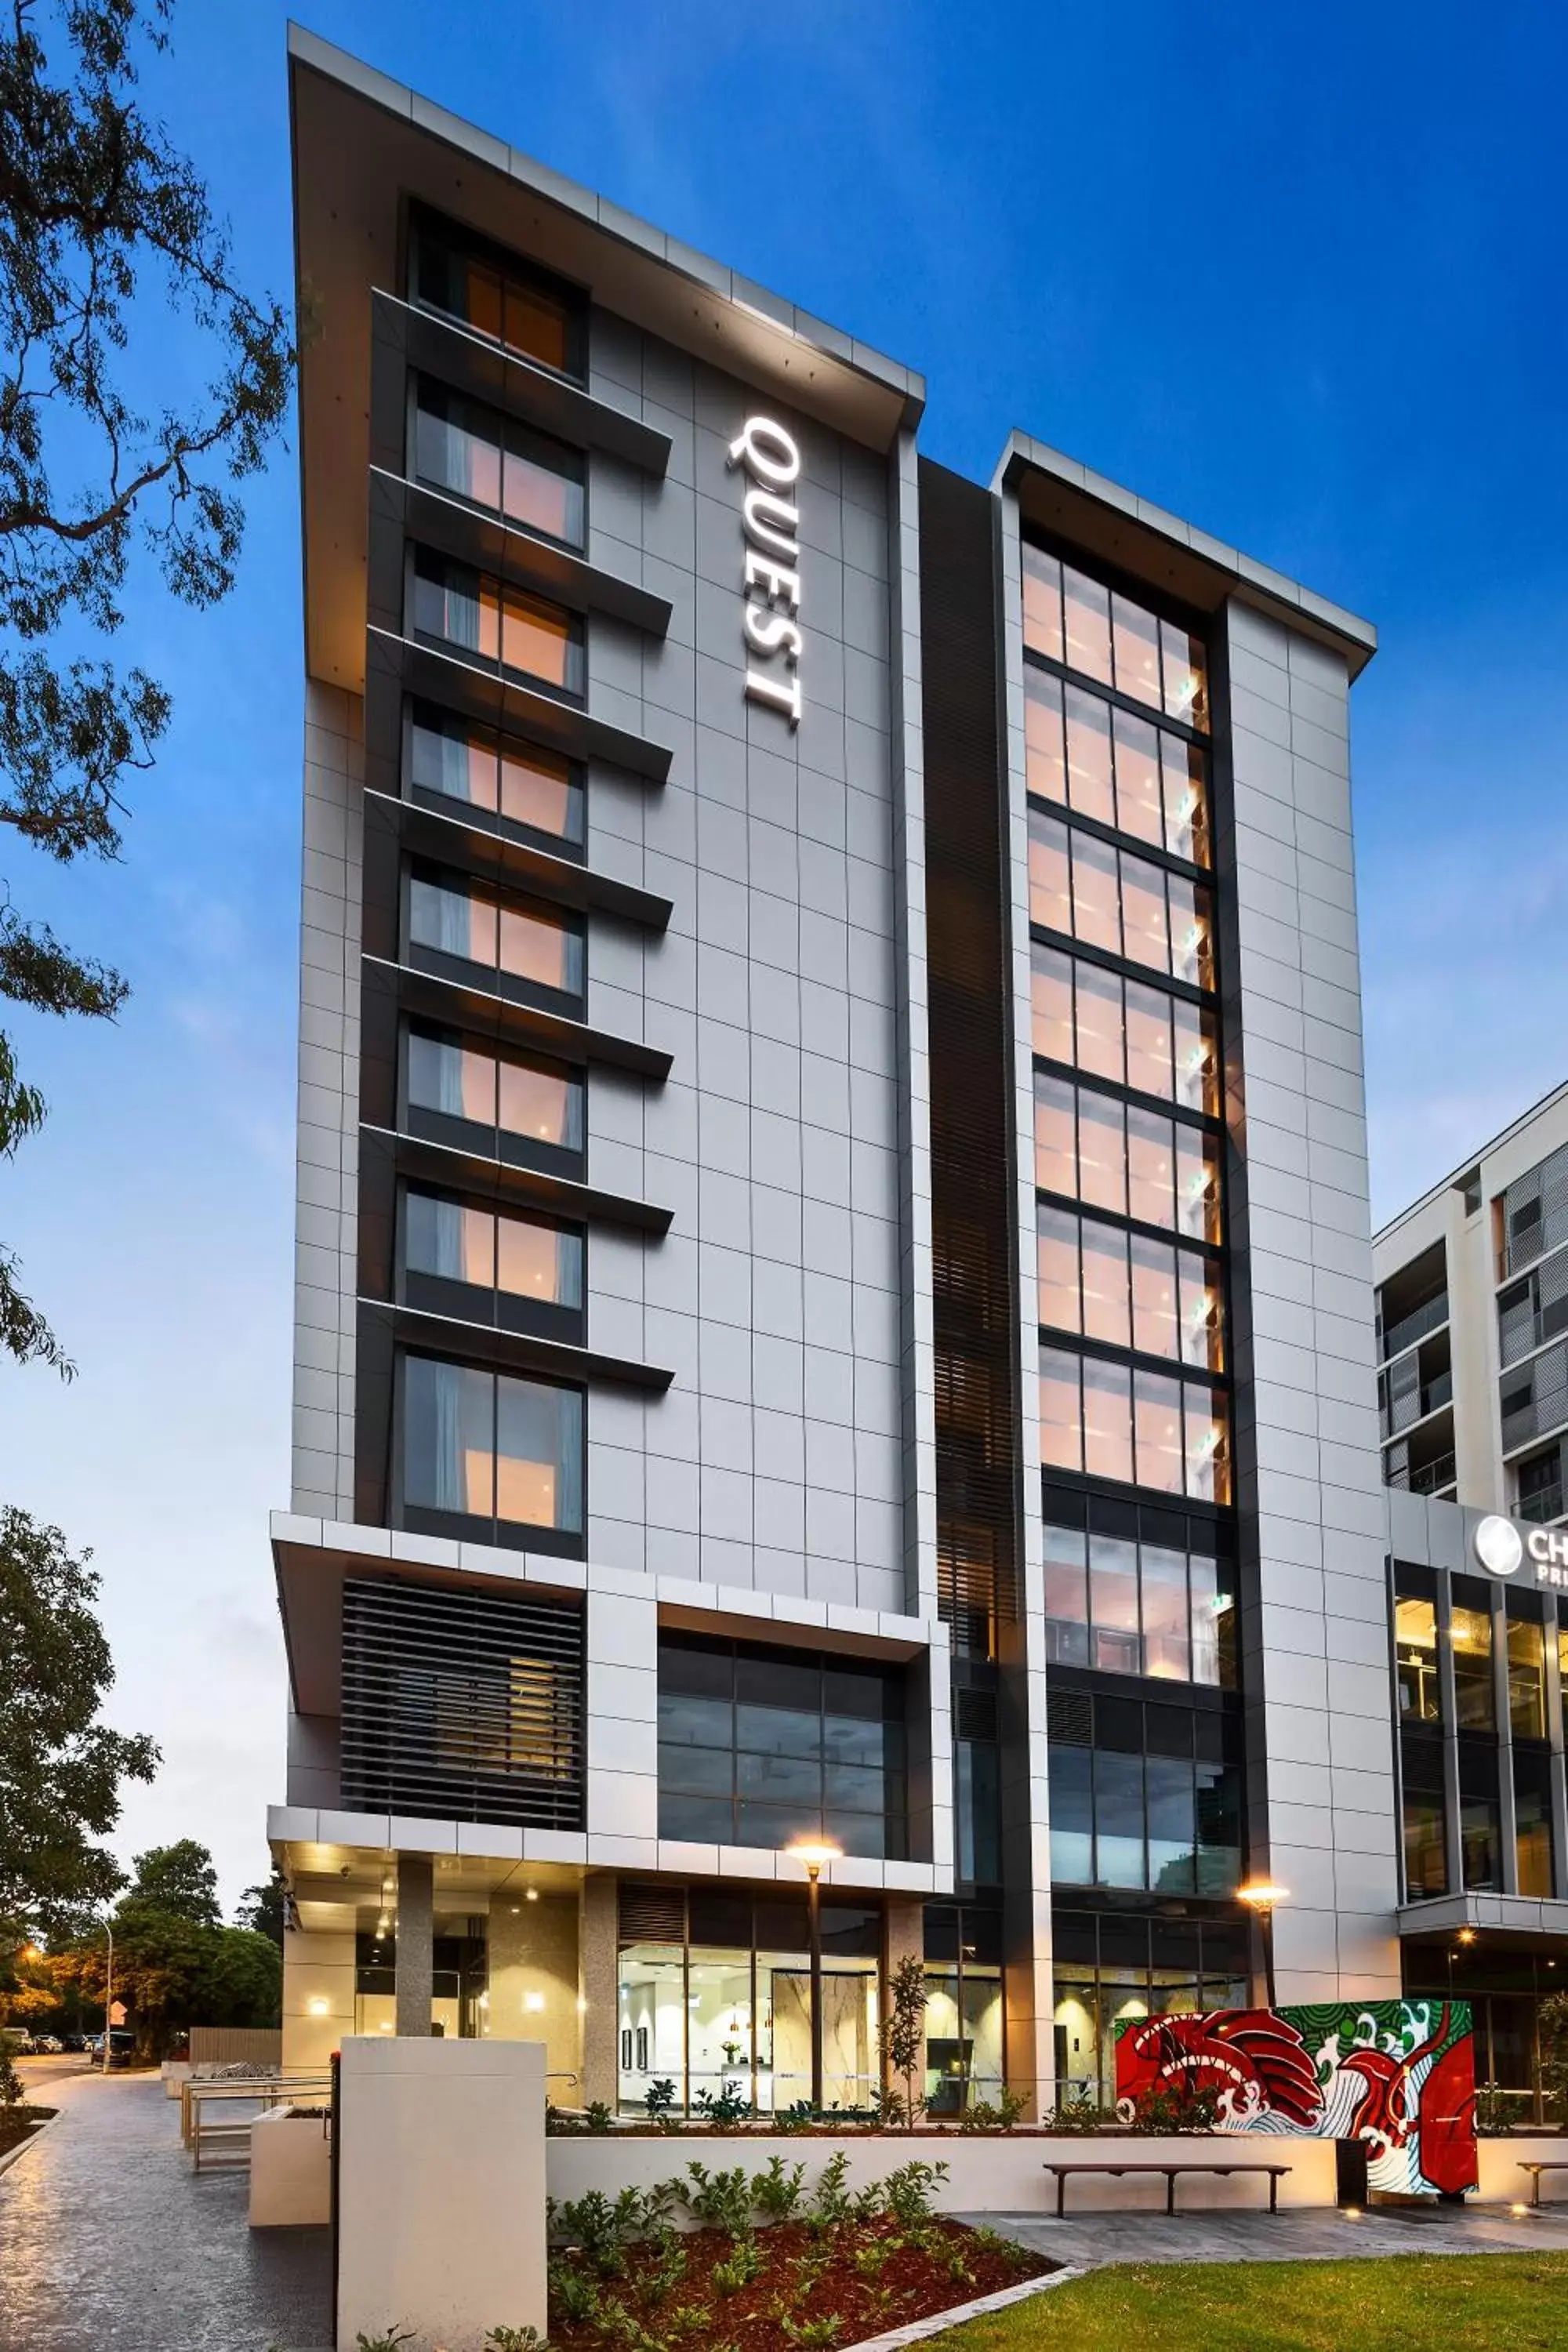 Property Building in Quest Chatswood